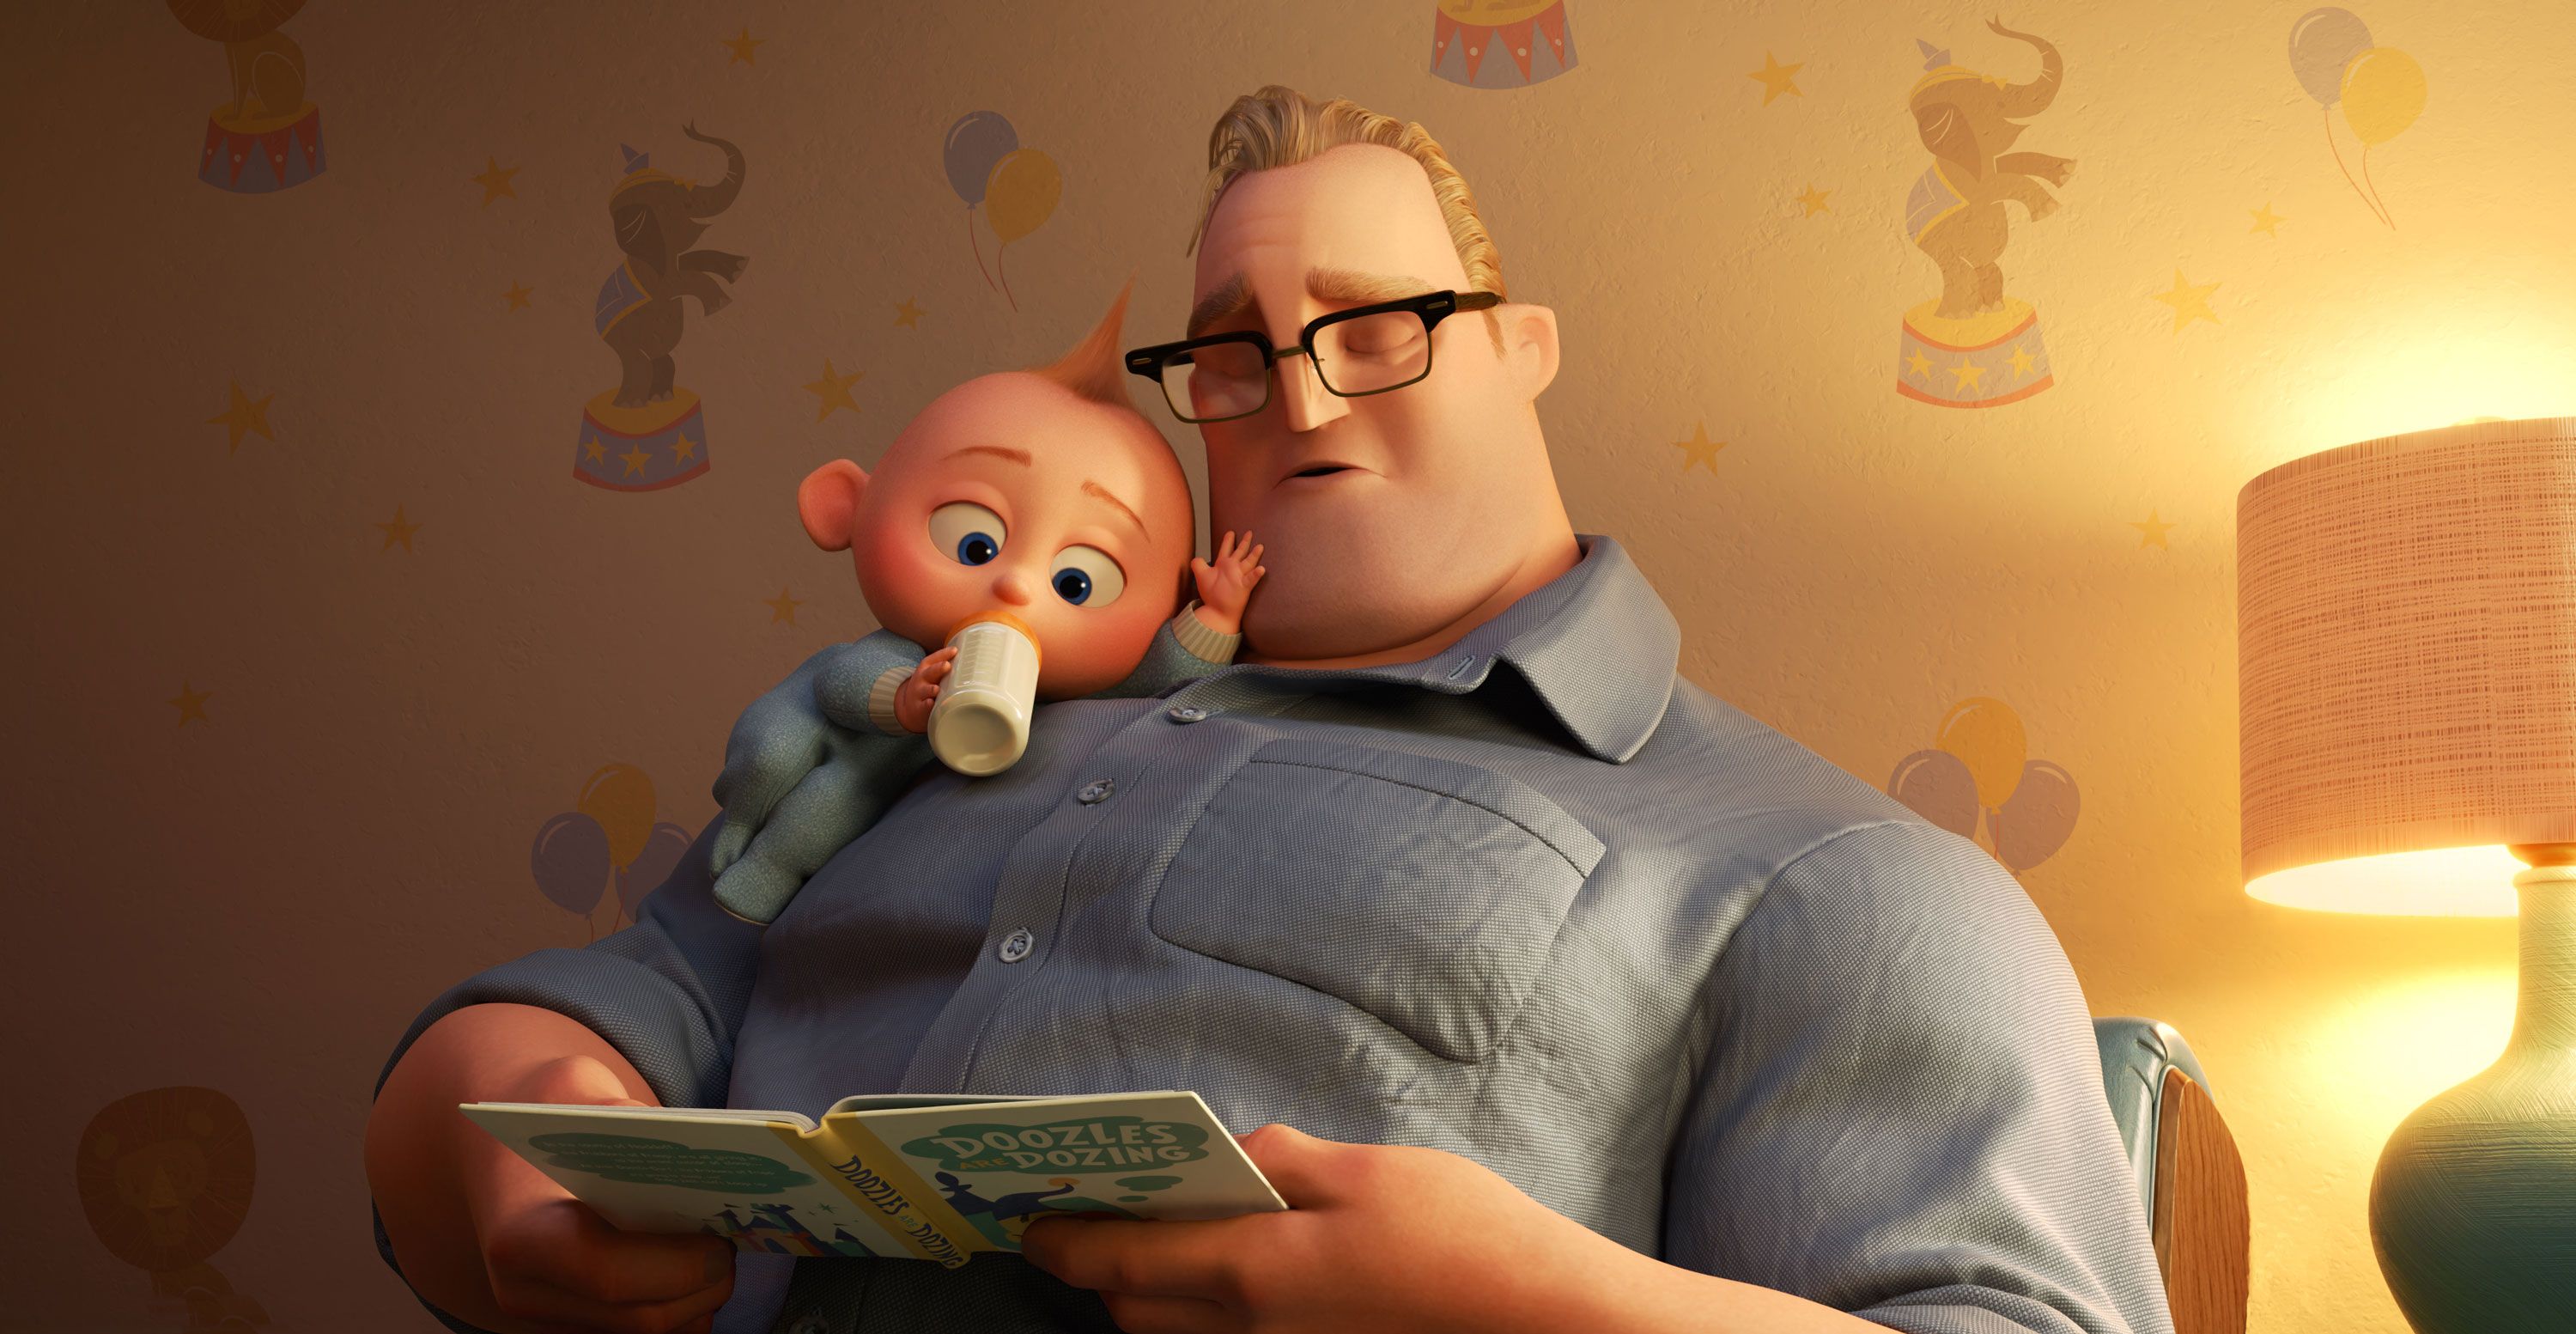 Where to Stream Incredibles 2?